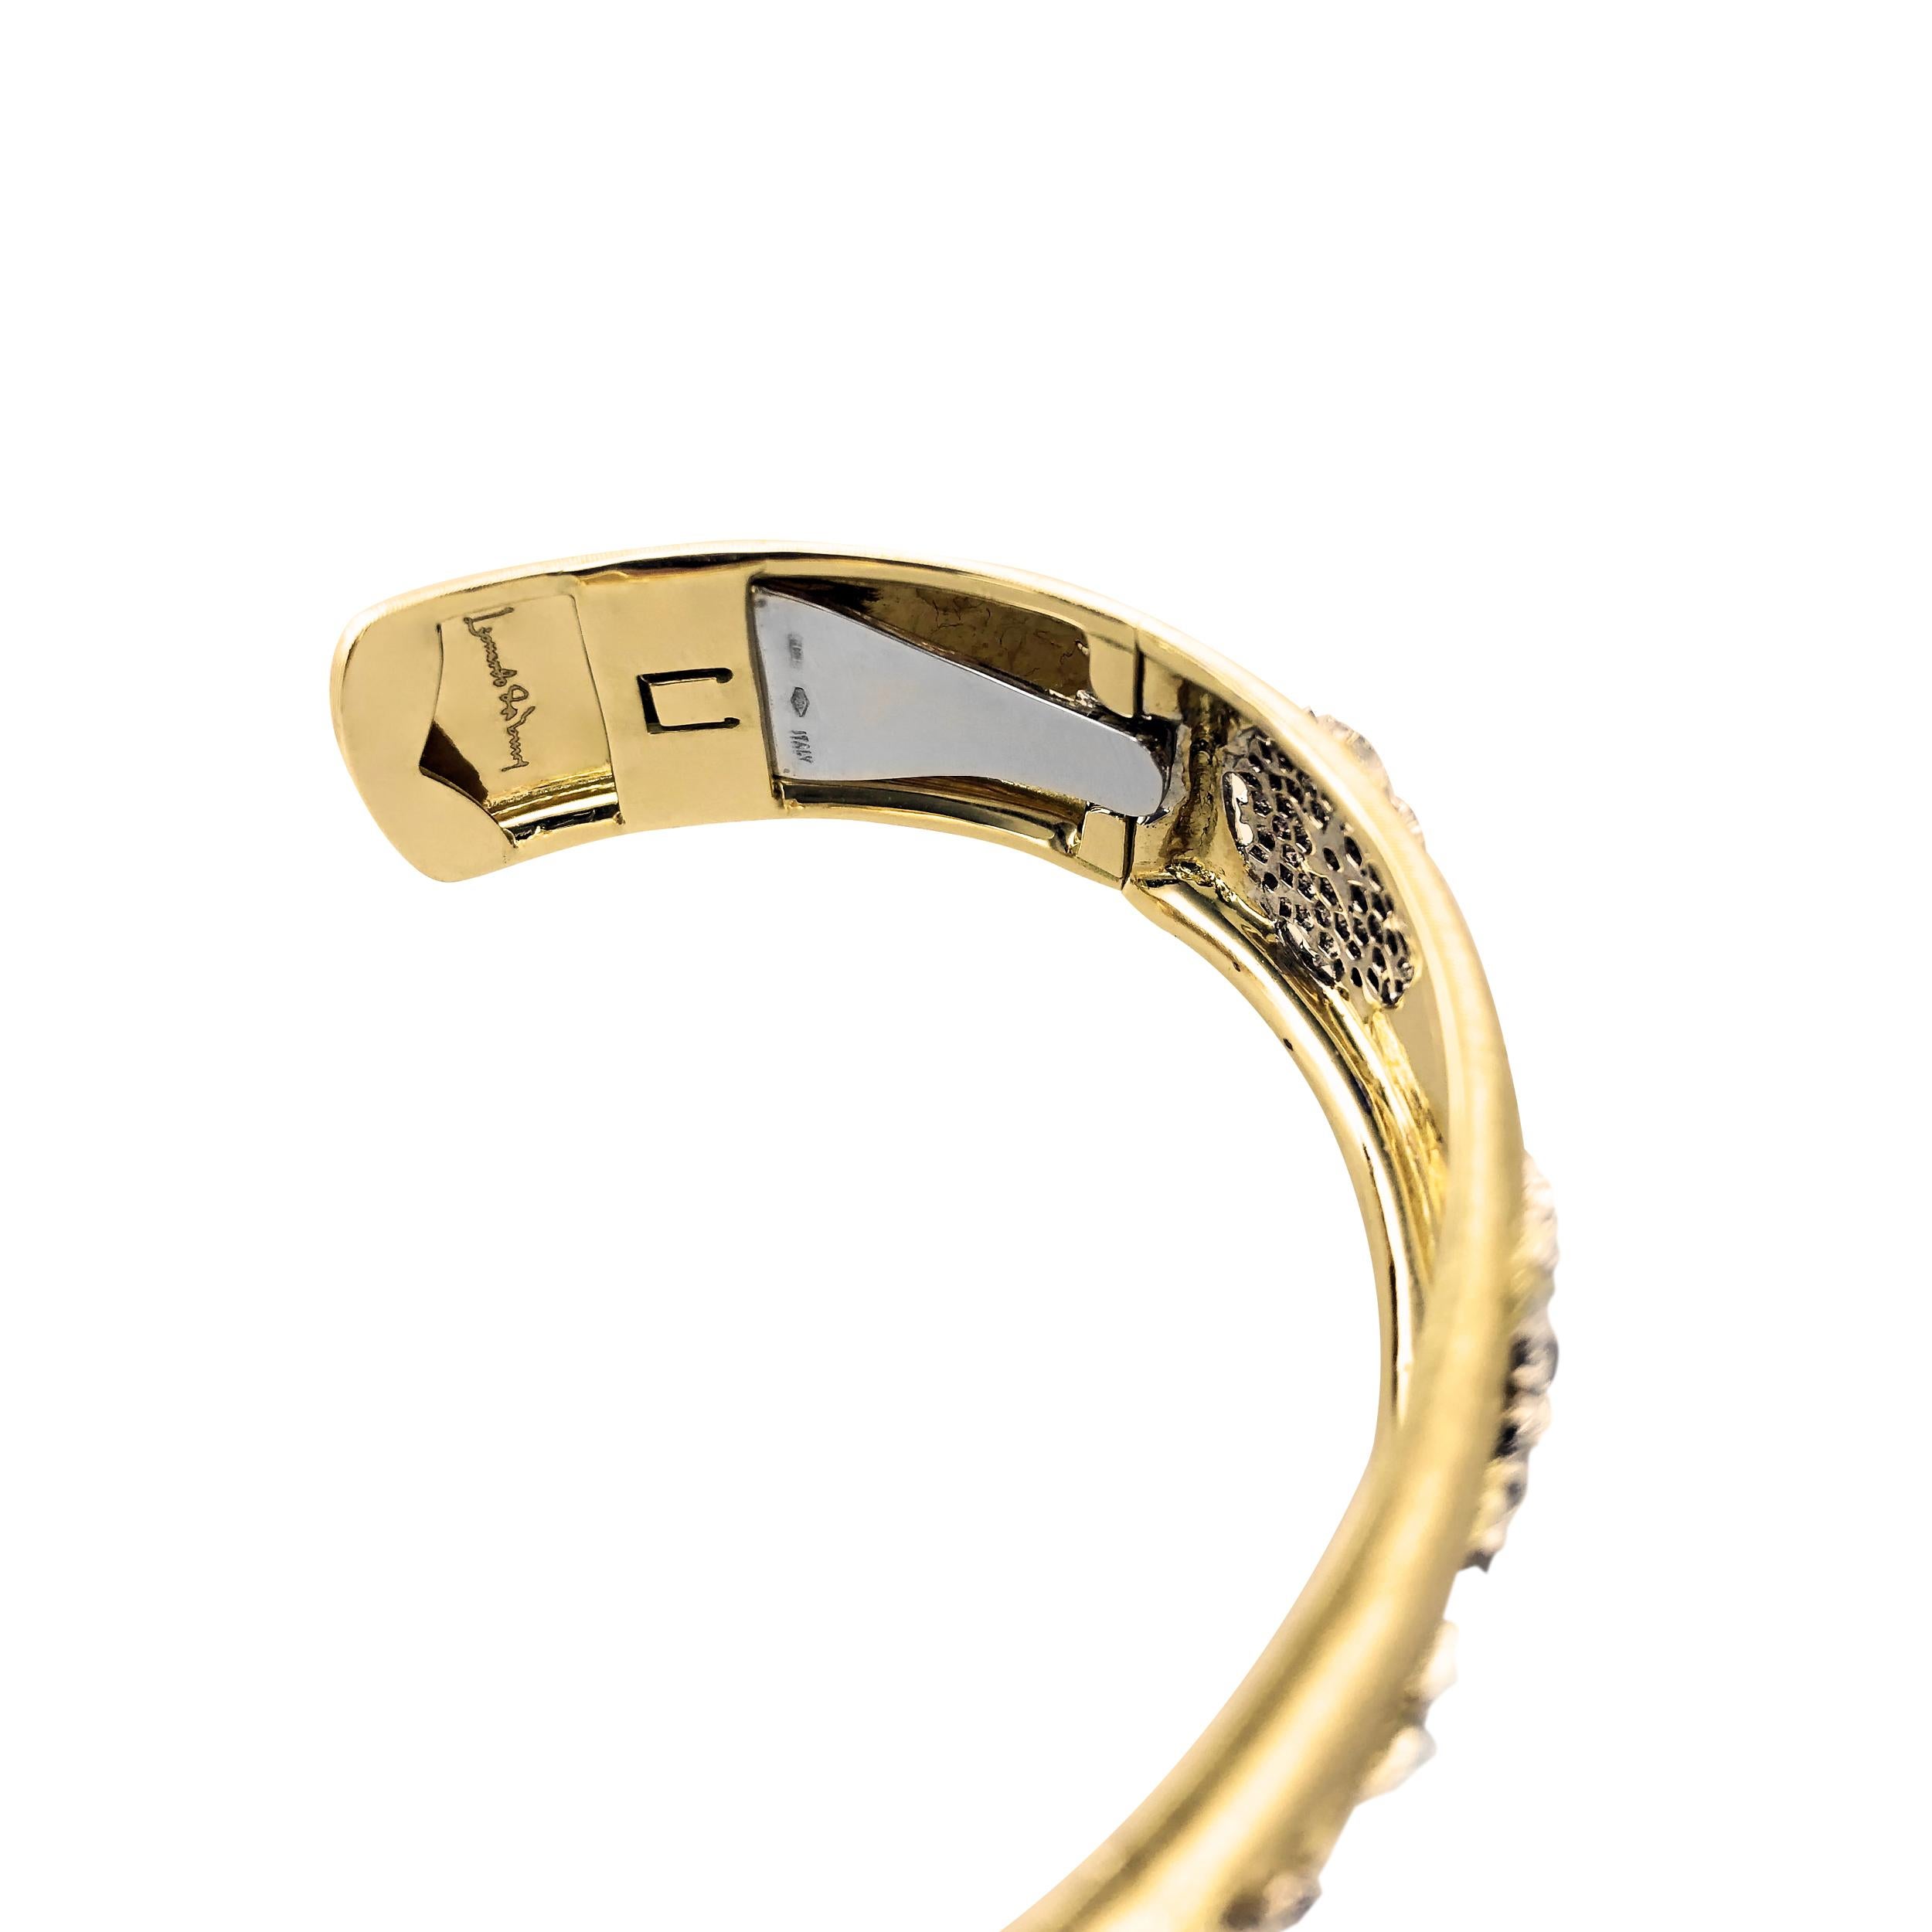 This Diamond and 18Kt yellow Gold Ginevra cuff bangle, is sprinkled with 0.45 Carats of Leonardo da Vinci Cut diamonds.

The matted Yellow Gold cuff bangle is uniquely designed with 5 large pentagons of white gold. Each pentagon is delicately